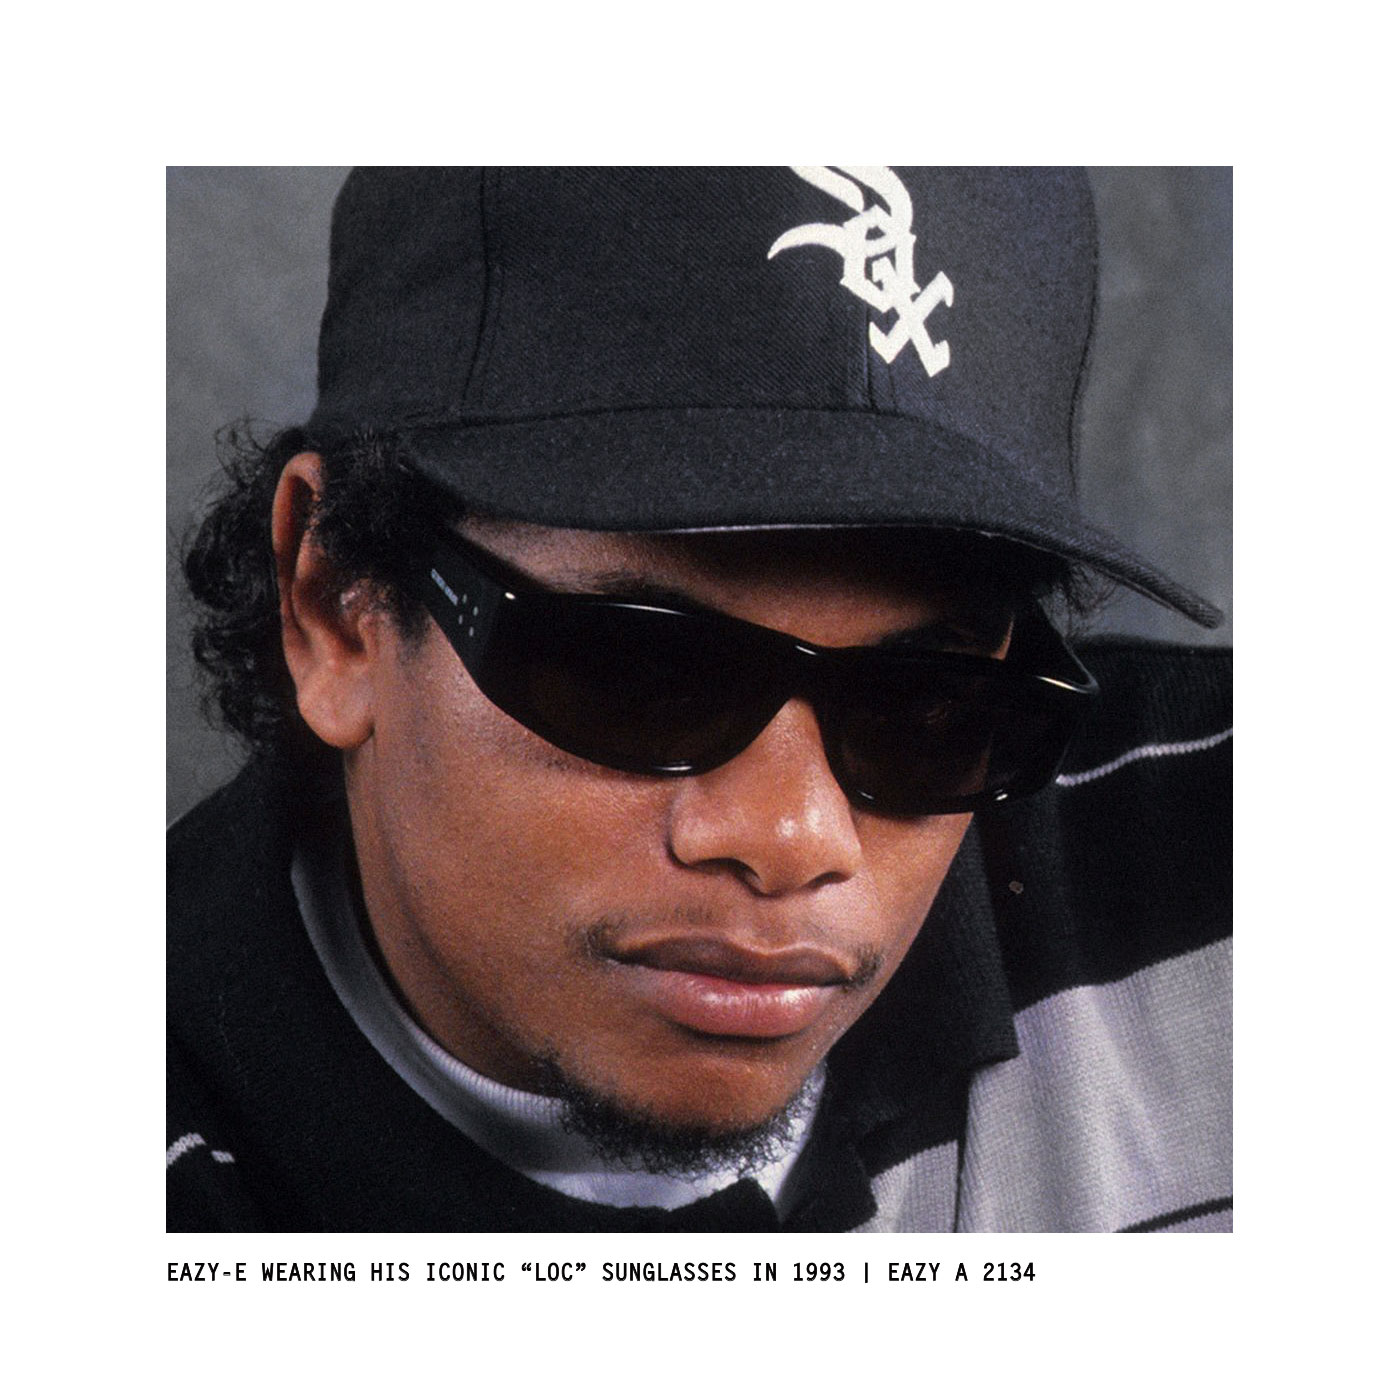 EAZY-E WEARING HIS ICONIC LOC SUNGLASSES IN 1993 EAZY A 2134 